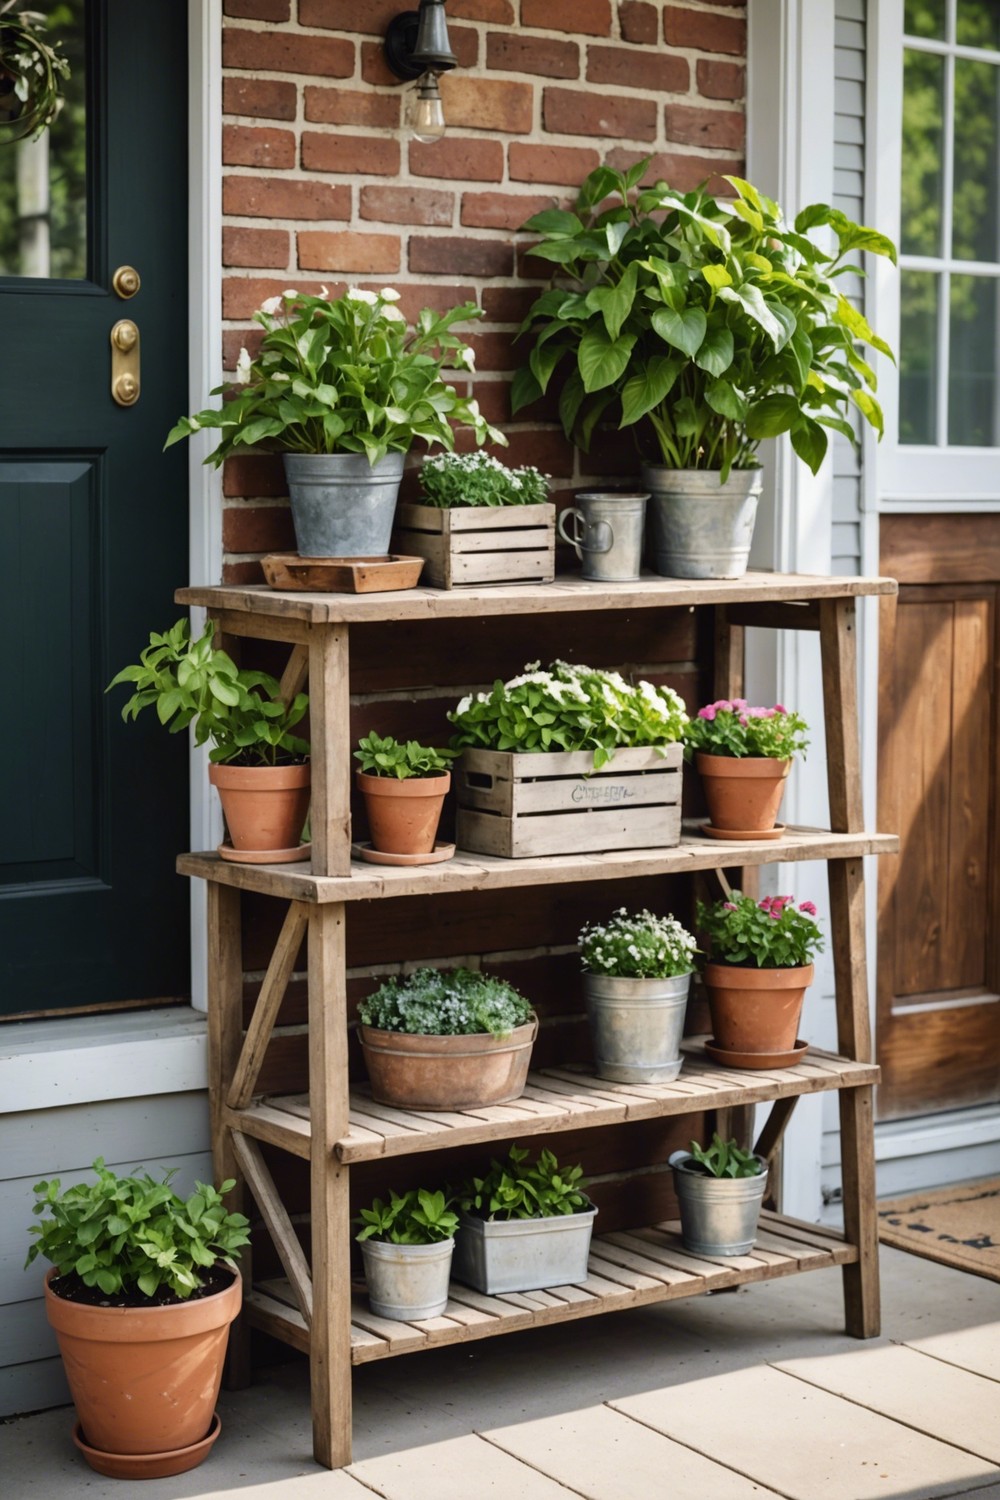 Add a DIY Potted Plant Station